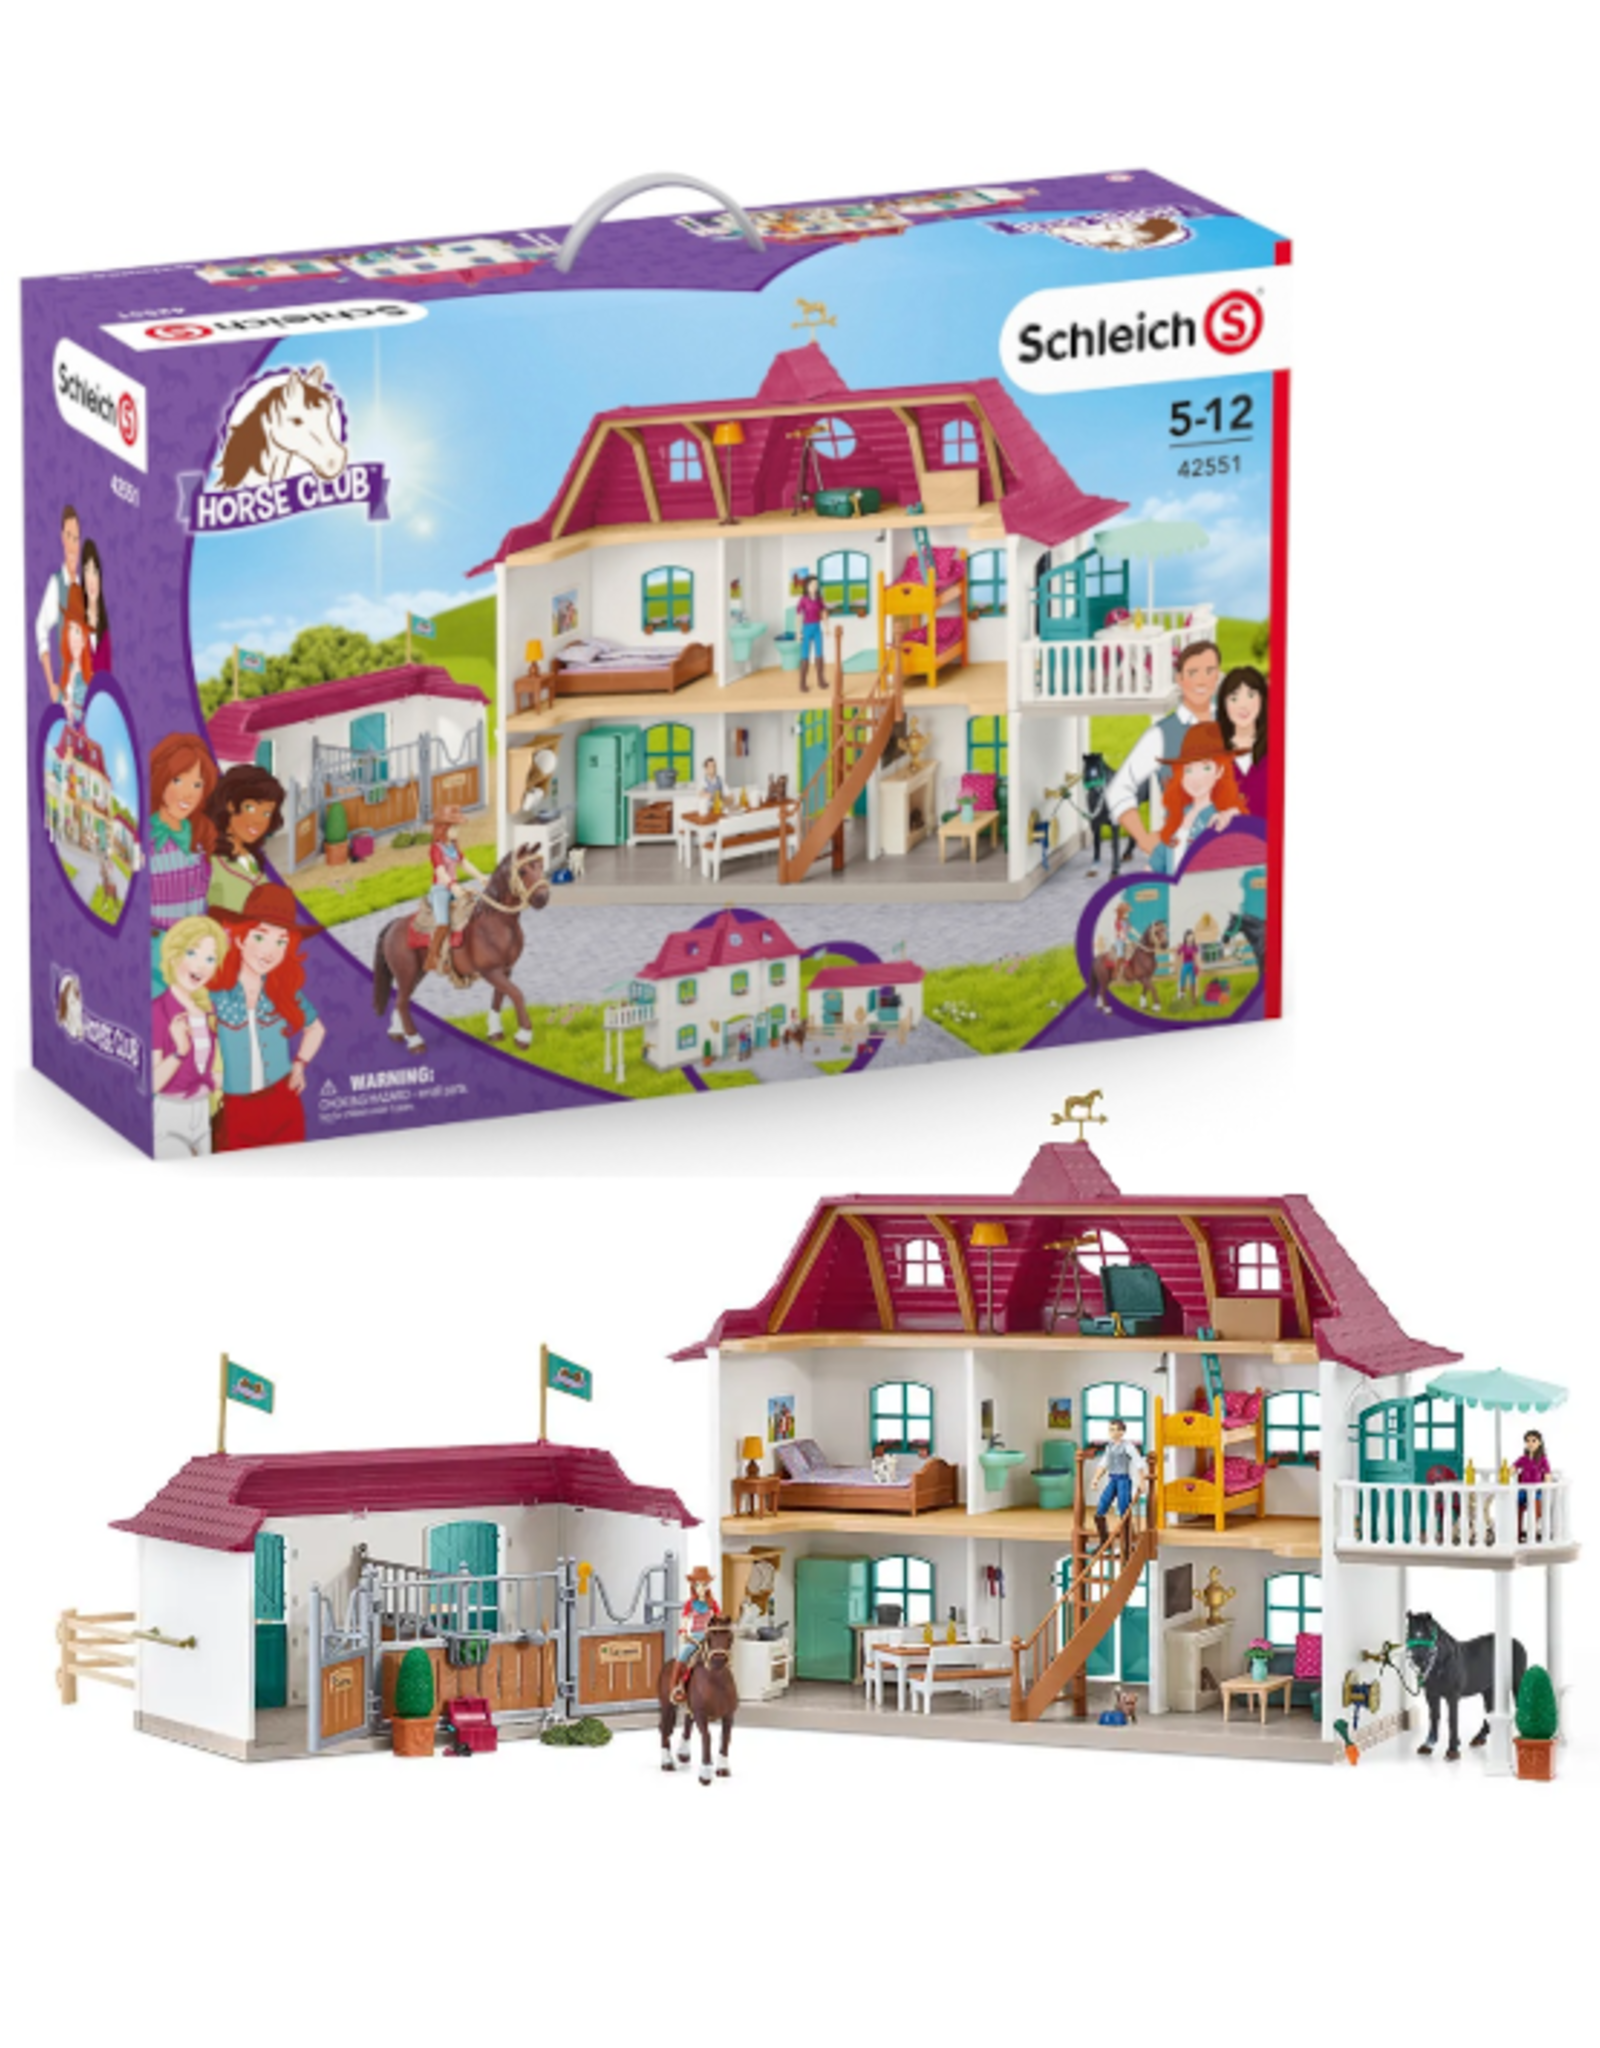 Schleich Schleich - Horse Club - 42551 - Lakeside Country House and Stables